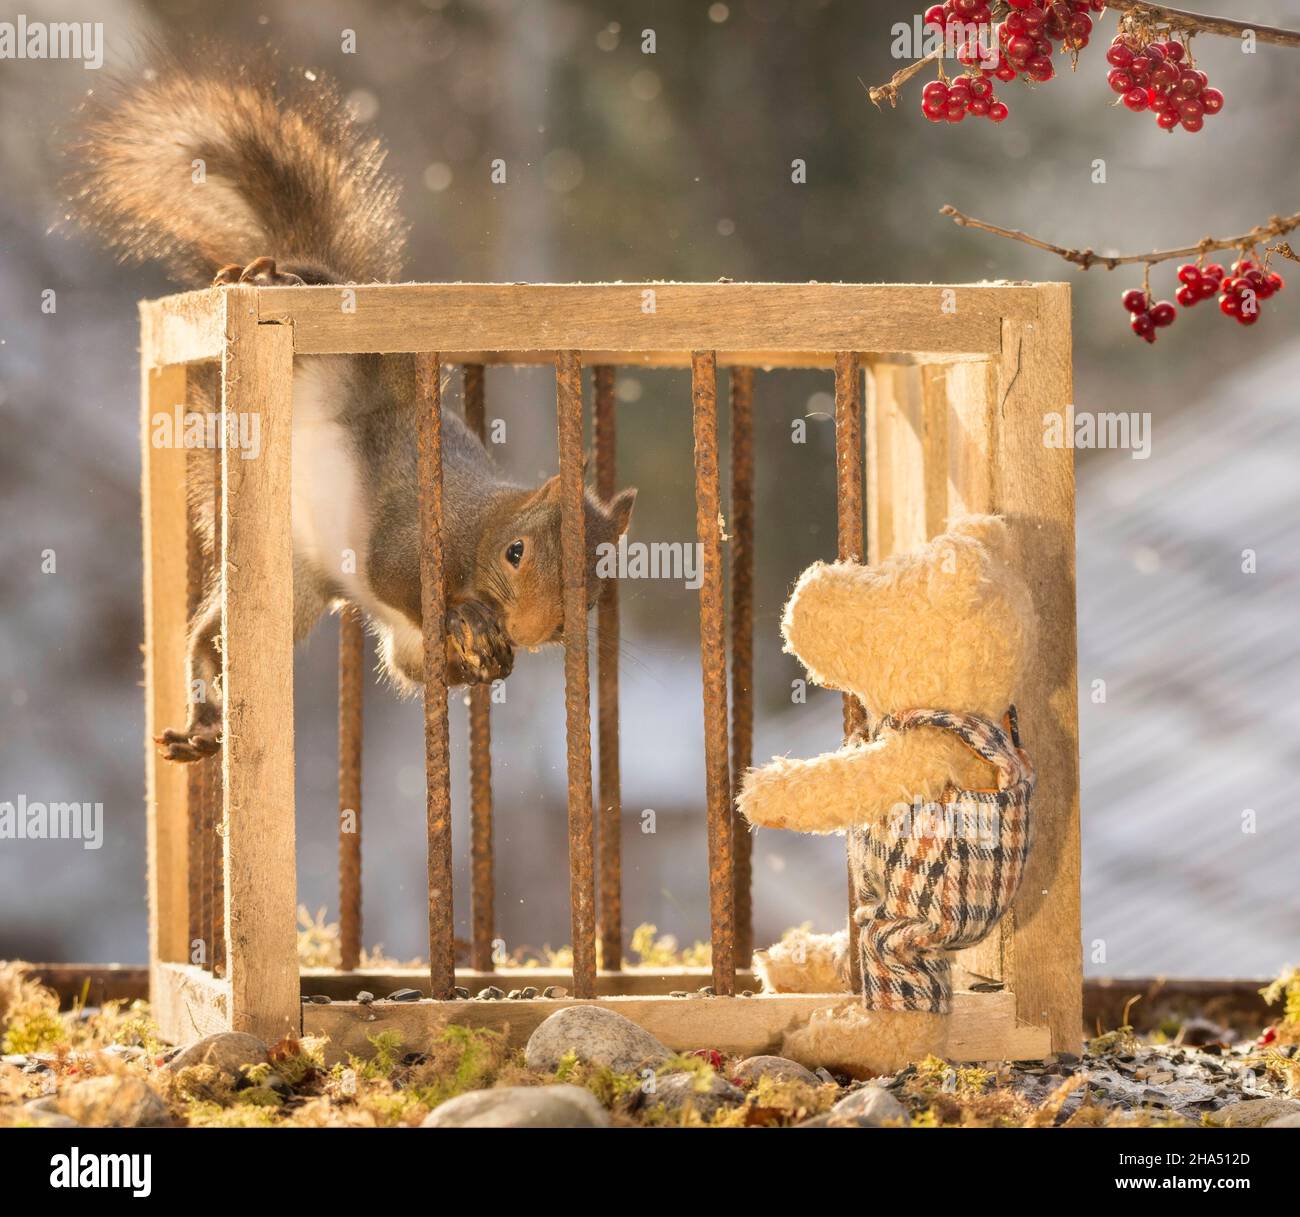 red squirrels standing behind bars with a bear watching while snowing Stock Photo